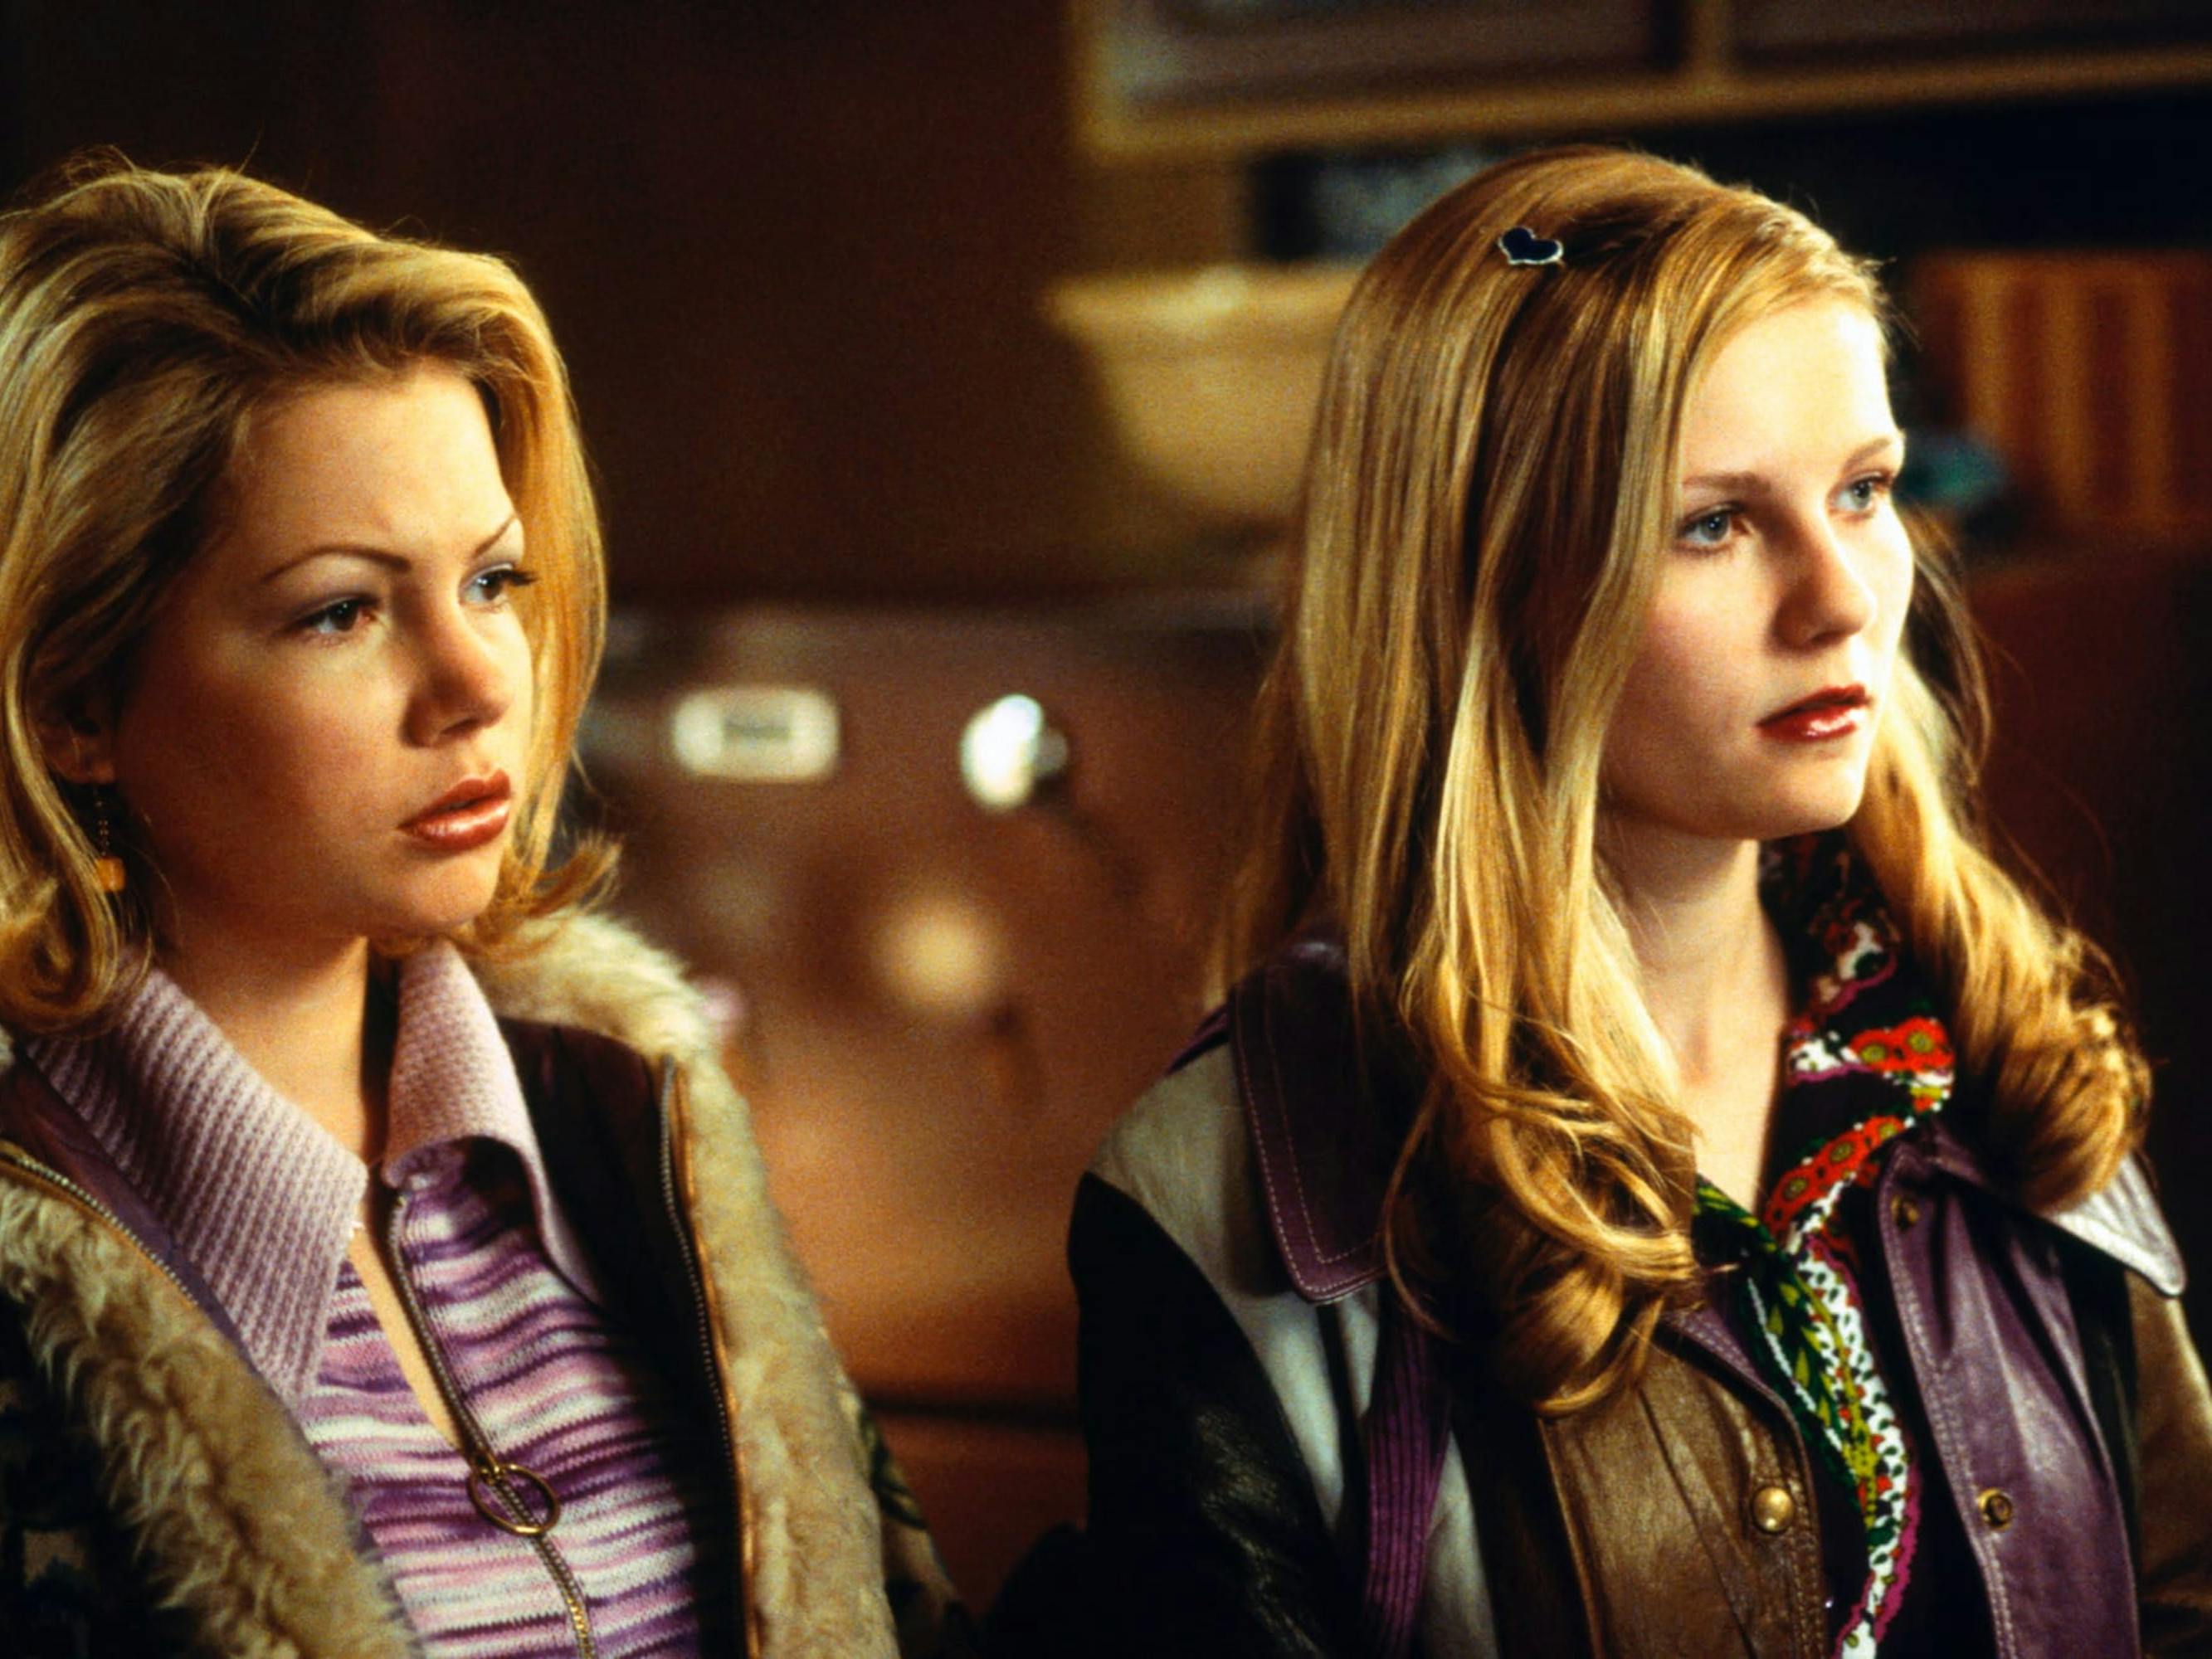 Ariene Lorenzo (Michelle Williams) and Betsy Jobs (Kirsten Dunst) wear purple and brown sweaters and jackets.